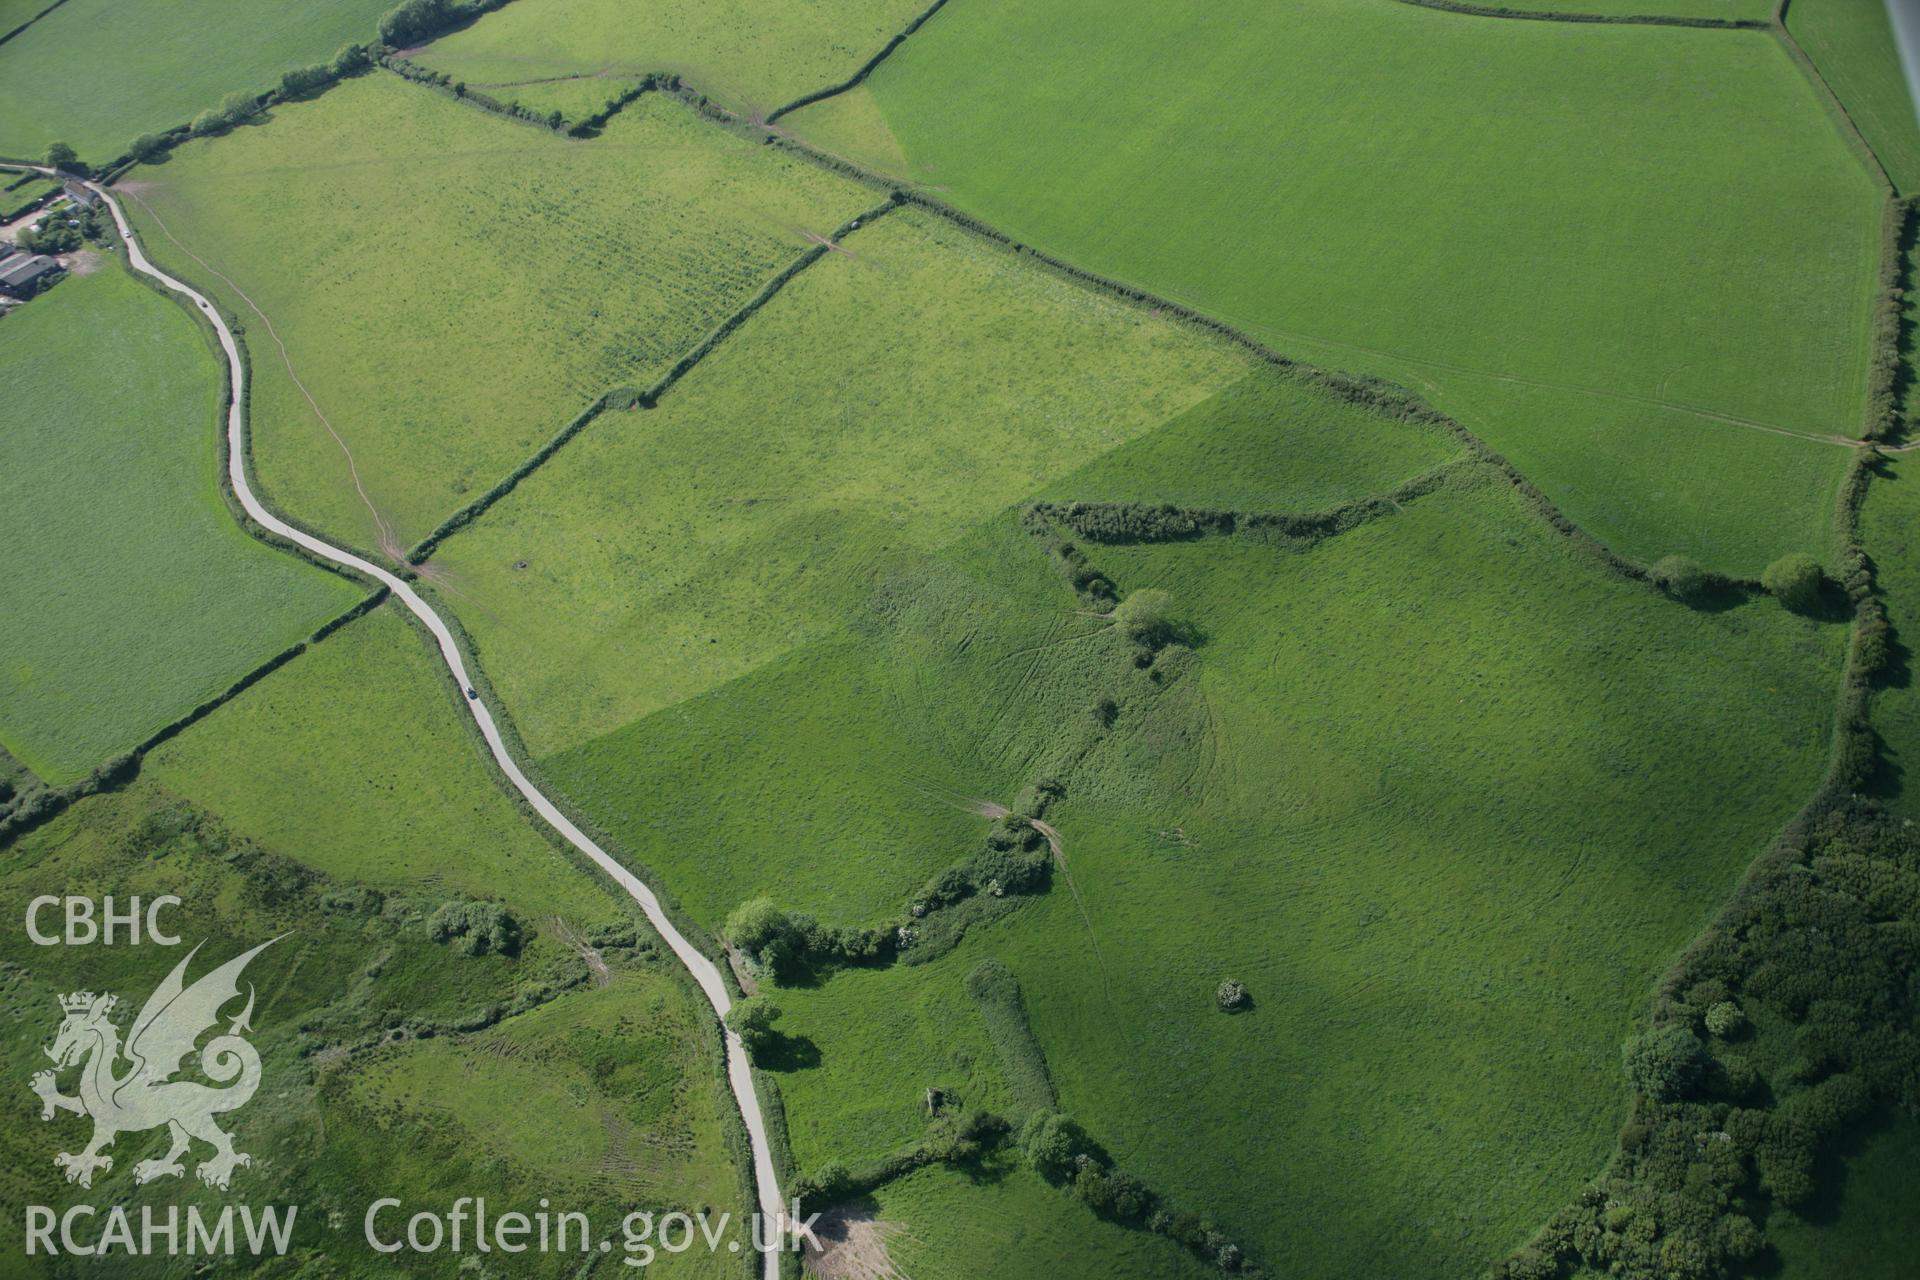 RCAHMW colour oblique aerial photograph of earthworks to the west of Coleman Farm Dovecote. Taken on 09 June 2005 by Toby Driver